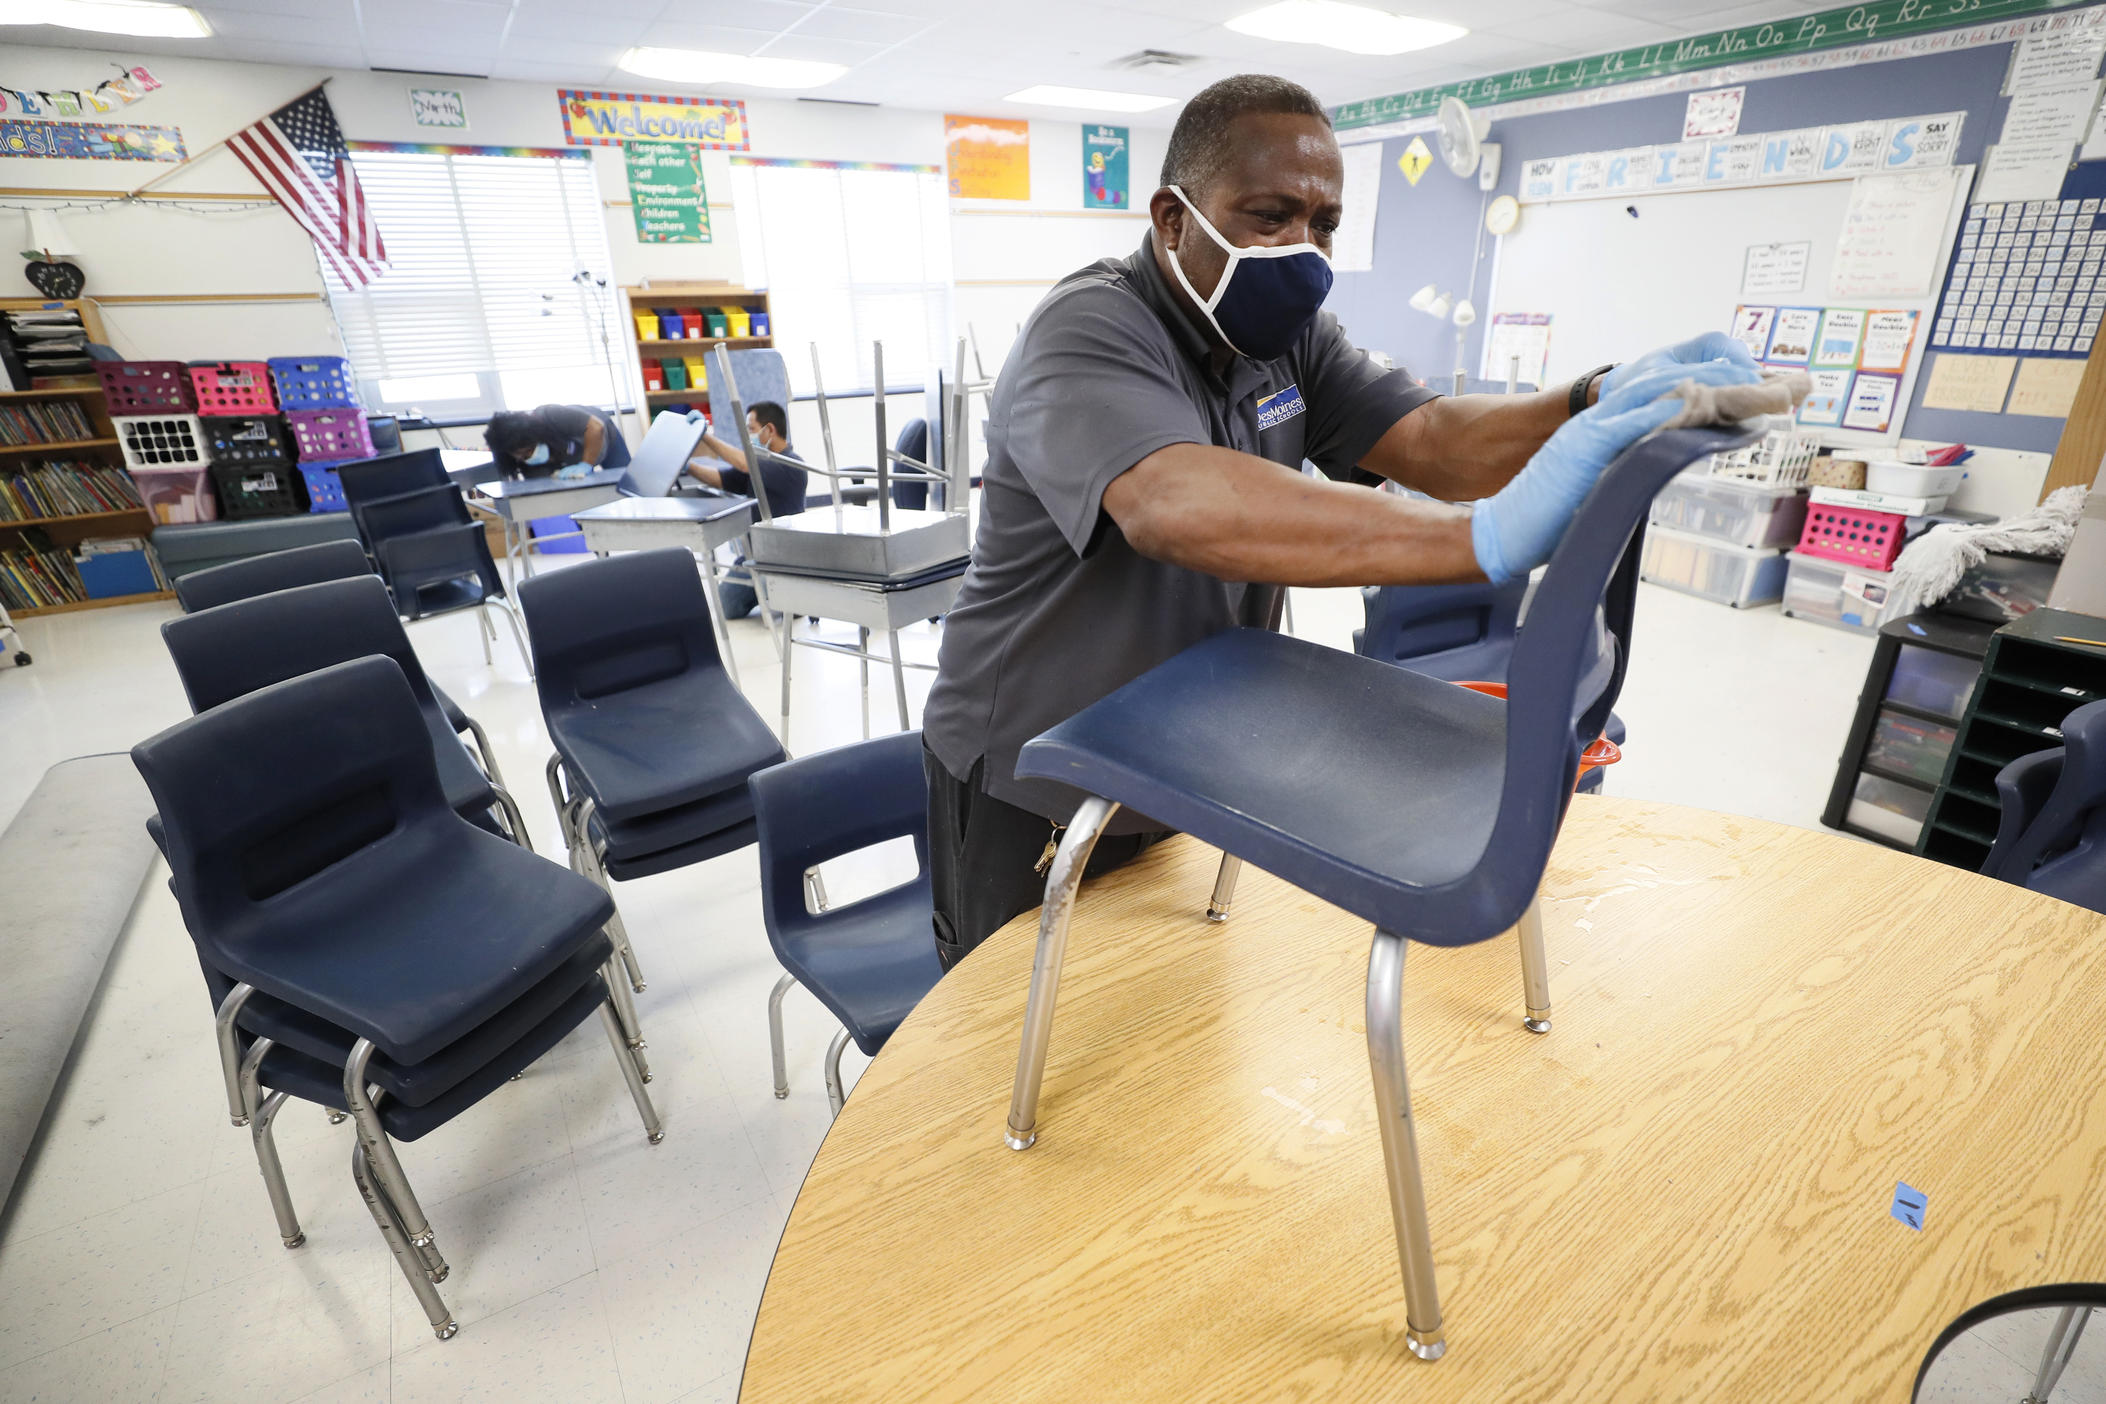 A man in gloves and a mask cleans a chair in a classroom.